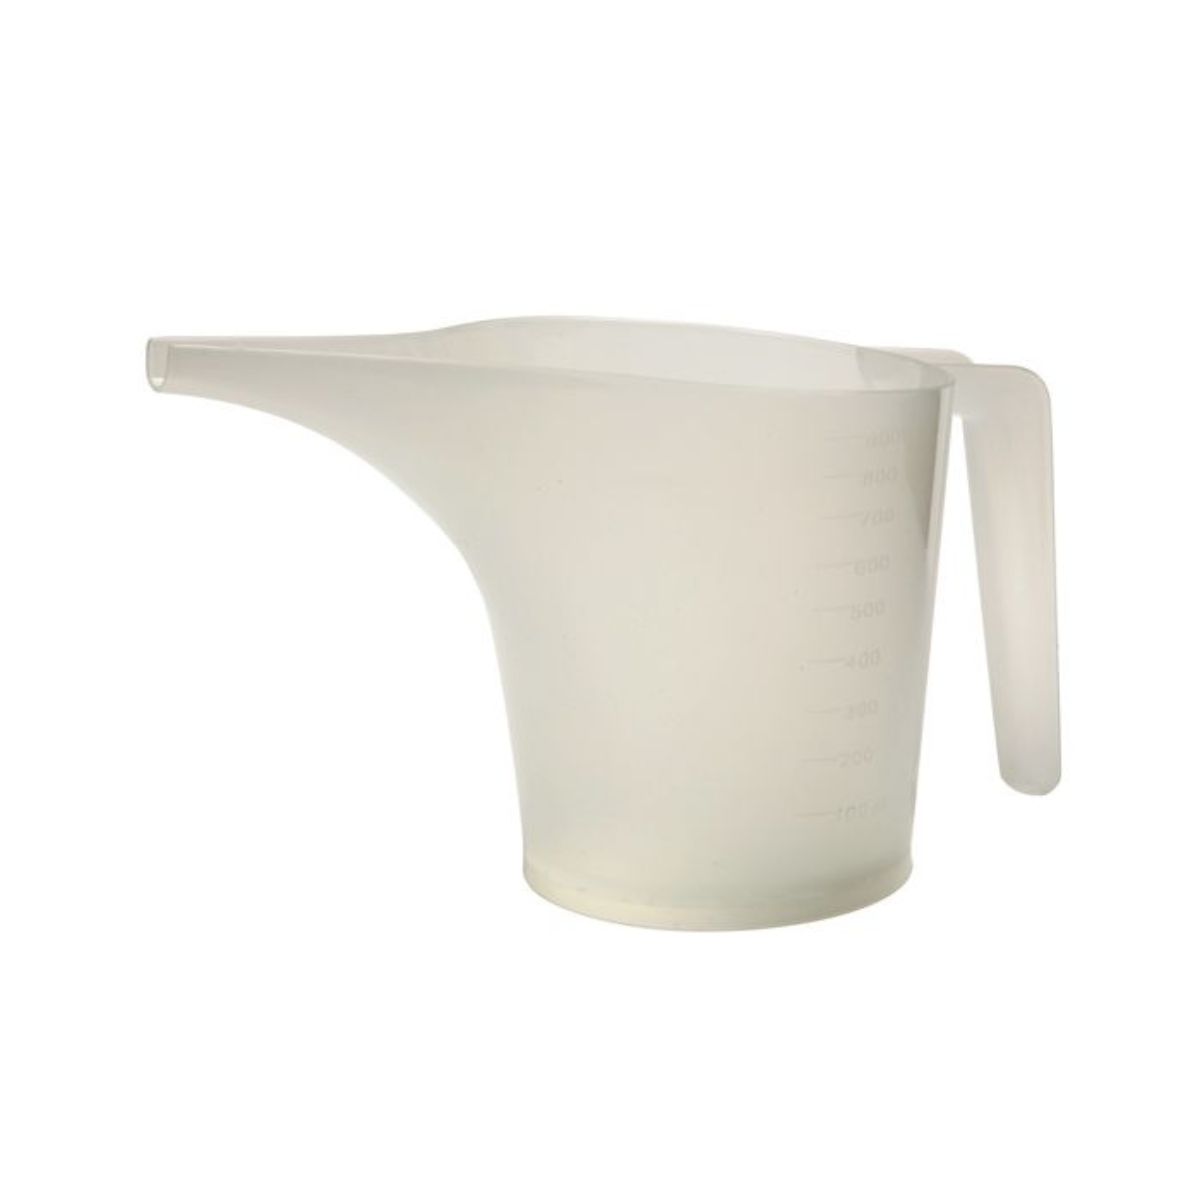 Norpro 3.5 Cup Measuring Funnel Pitcher